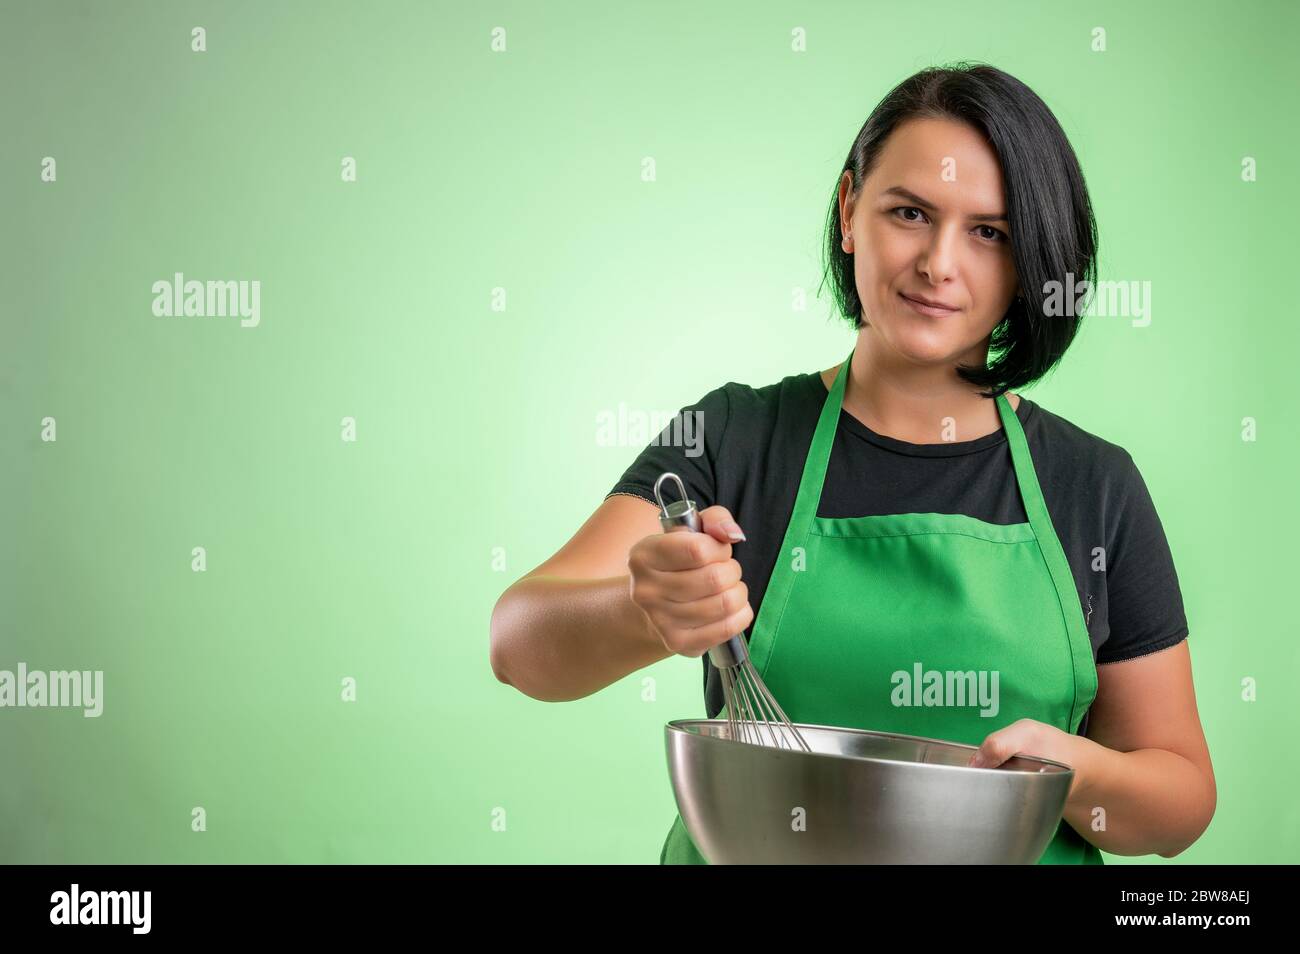 https://c8.alamy.com/comp/2BW8AEJ/female-cook-with-green-apron-and-black-t-shirt-hold-the-bowl-and-whisk-in-her-hands-isolated-on-green-background-2BW8AEJ.jpg